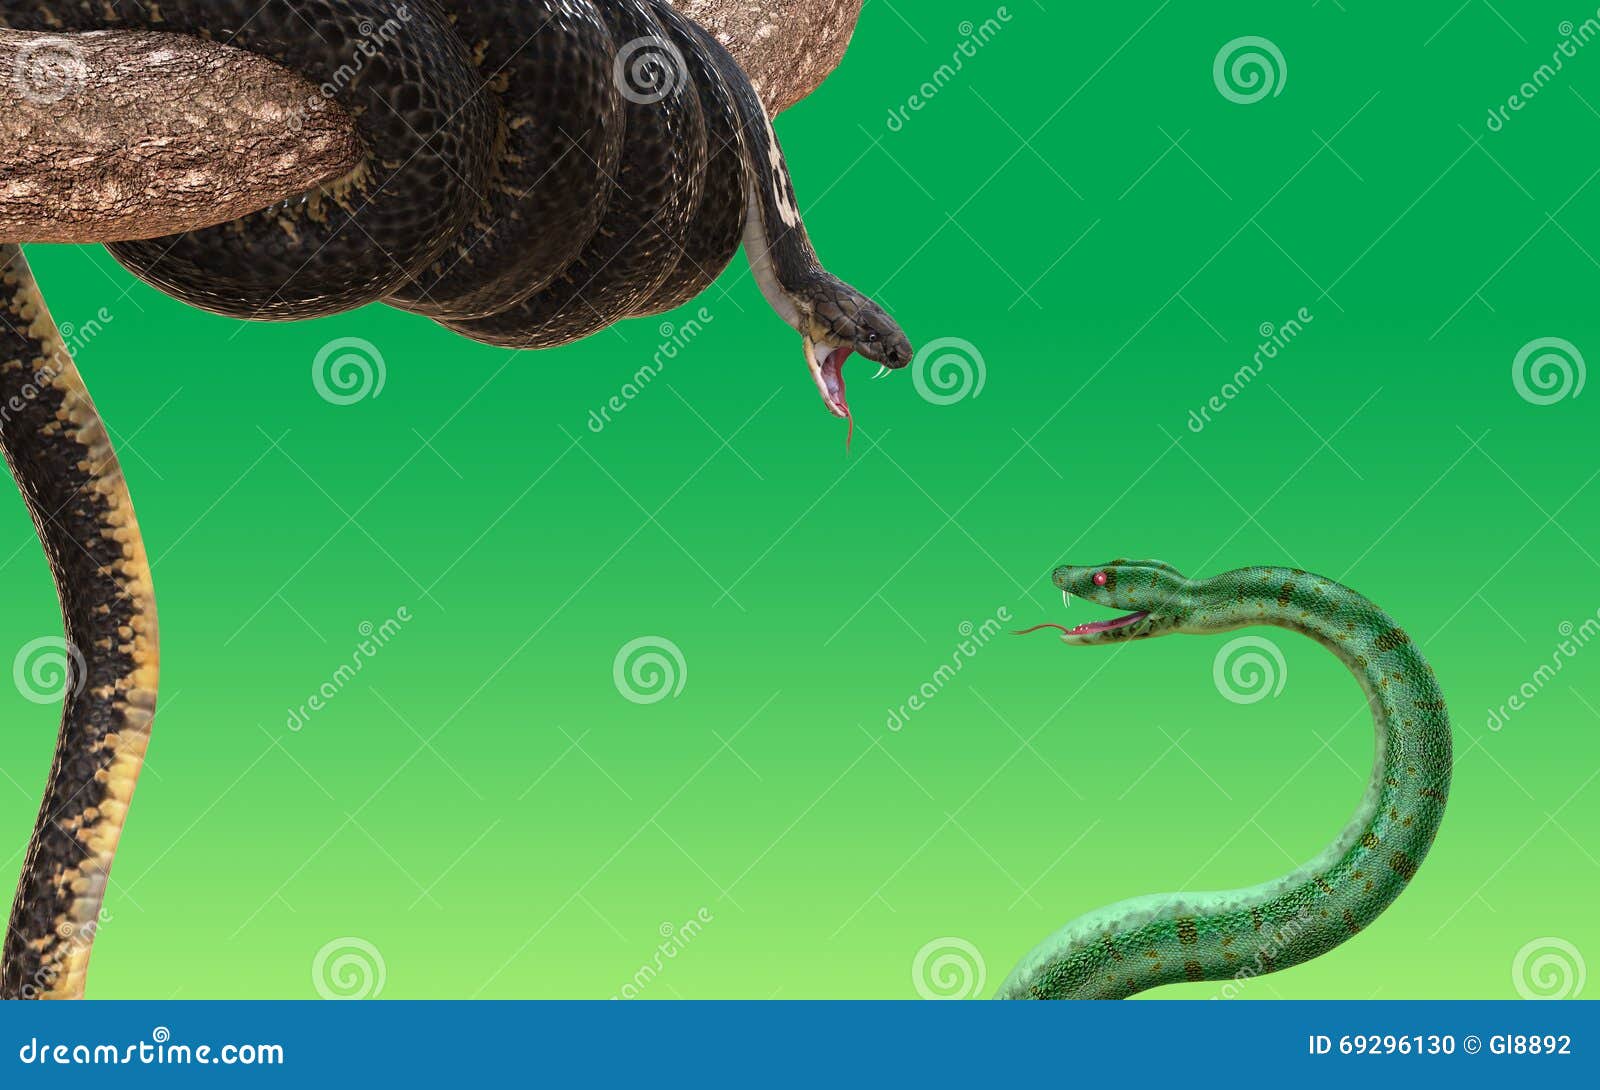 King Cobra And Green Snake Fighting And Attacking 3d Rendered Model